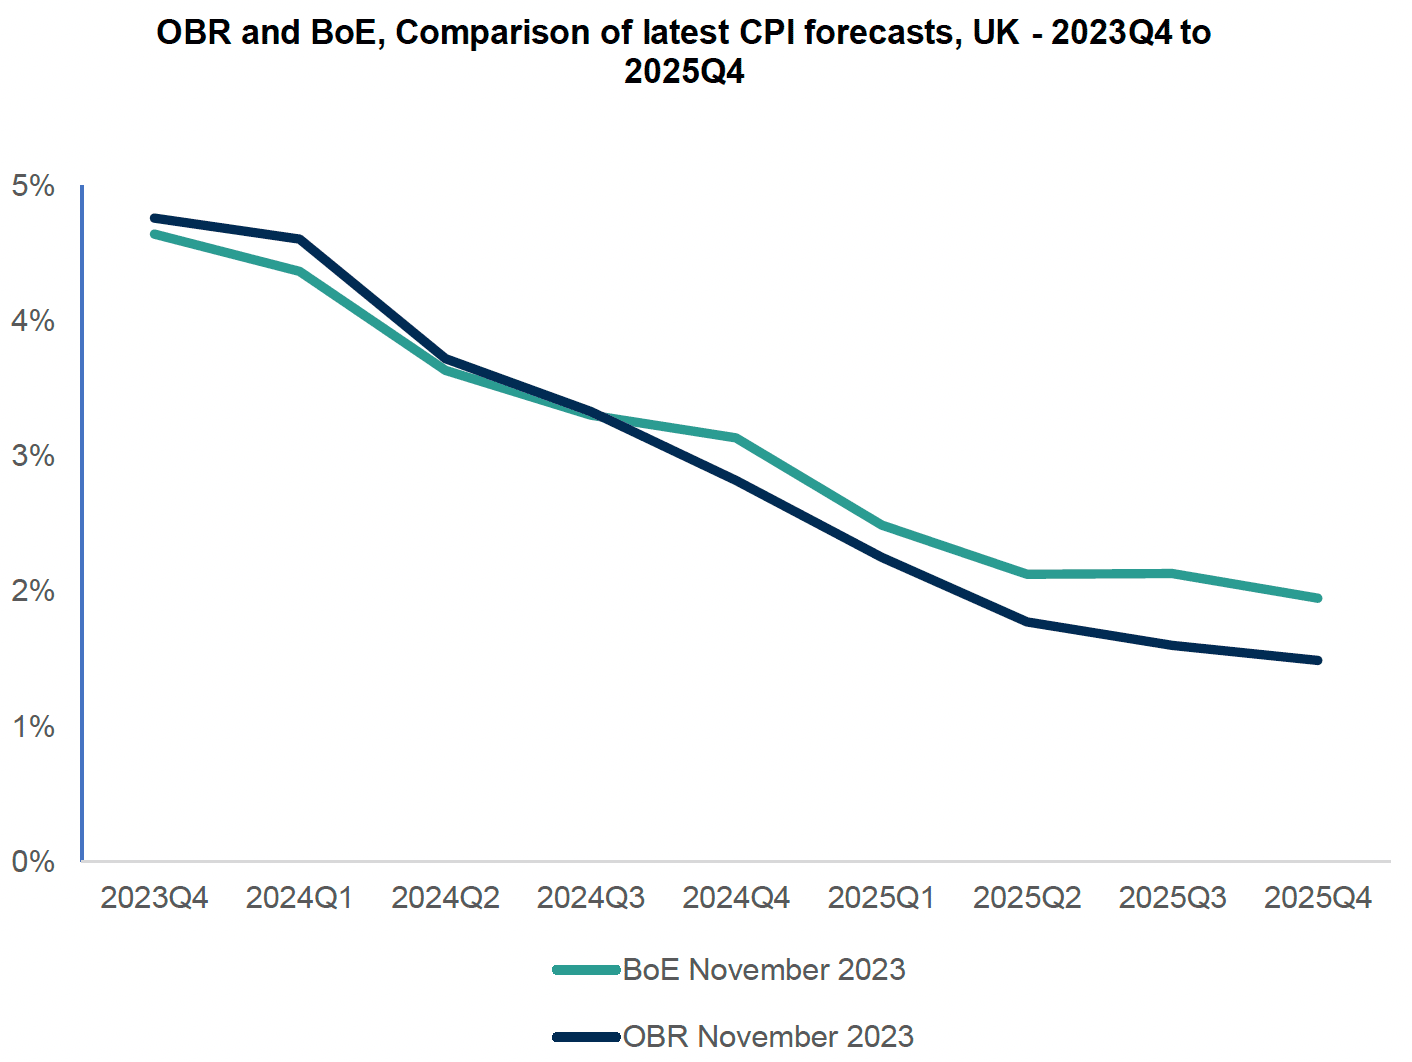 Line graph showing the inflation trends forecasted by BoE and OBR from Quarter 4 of 2023 to Quarter 4 of 2025.